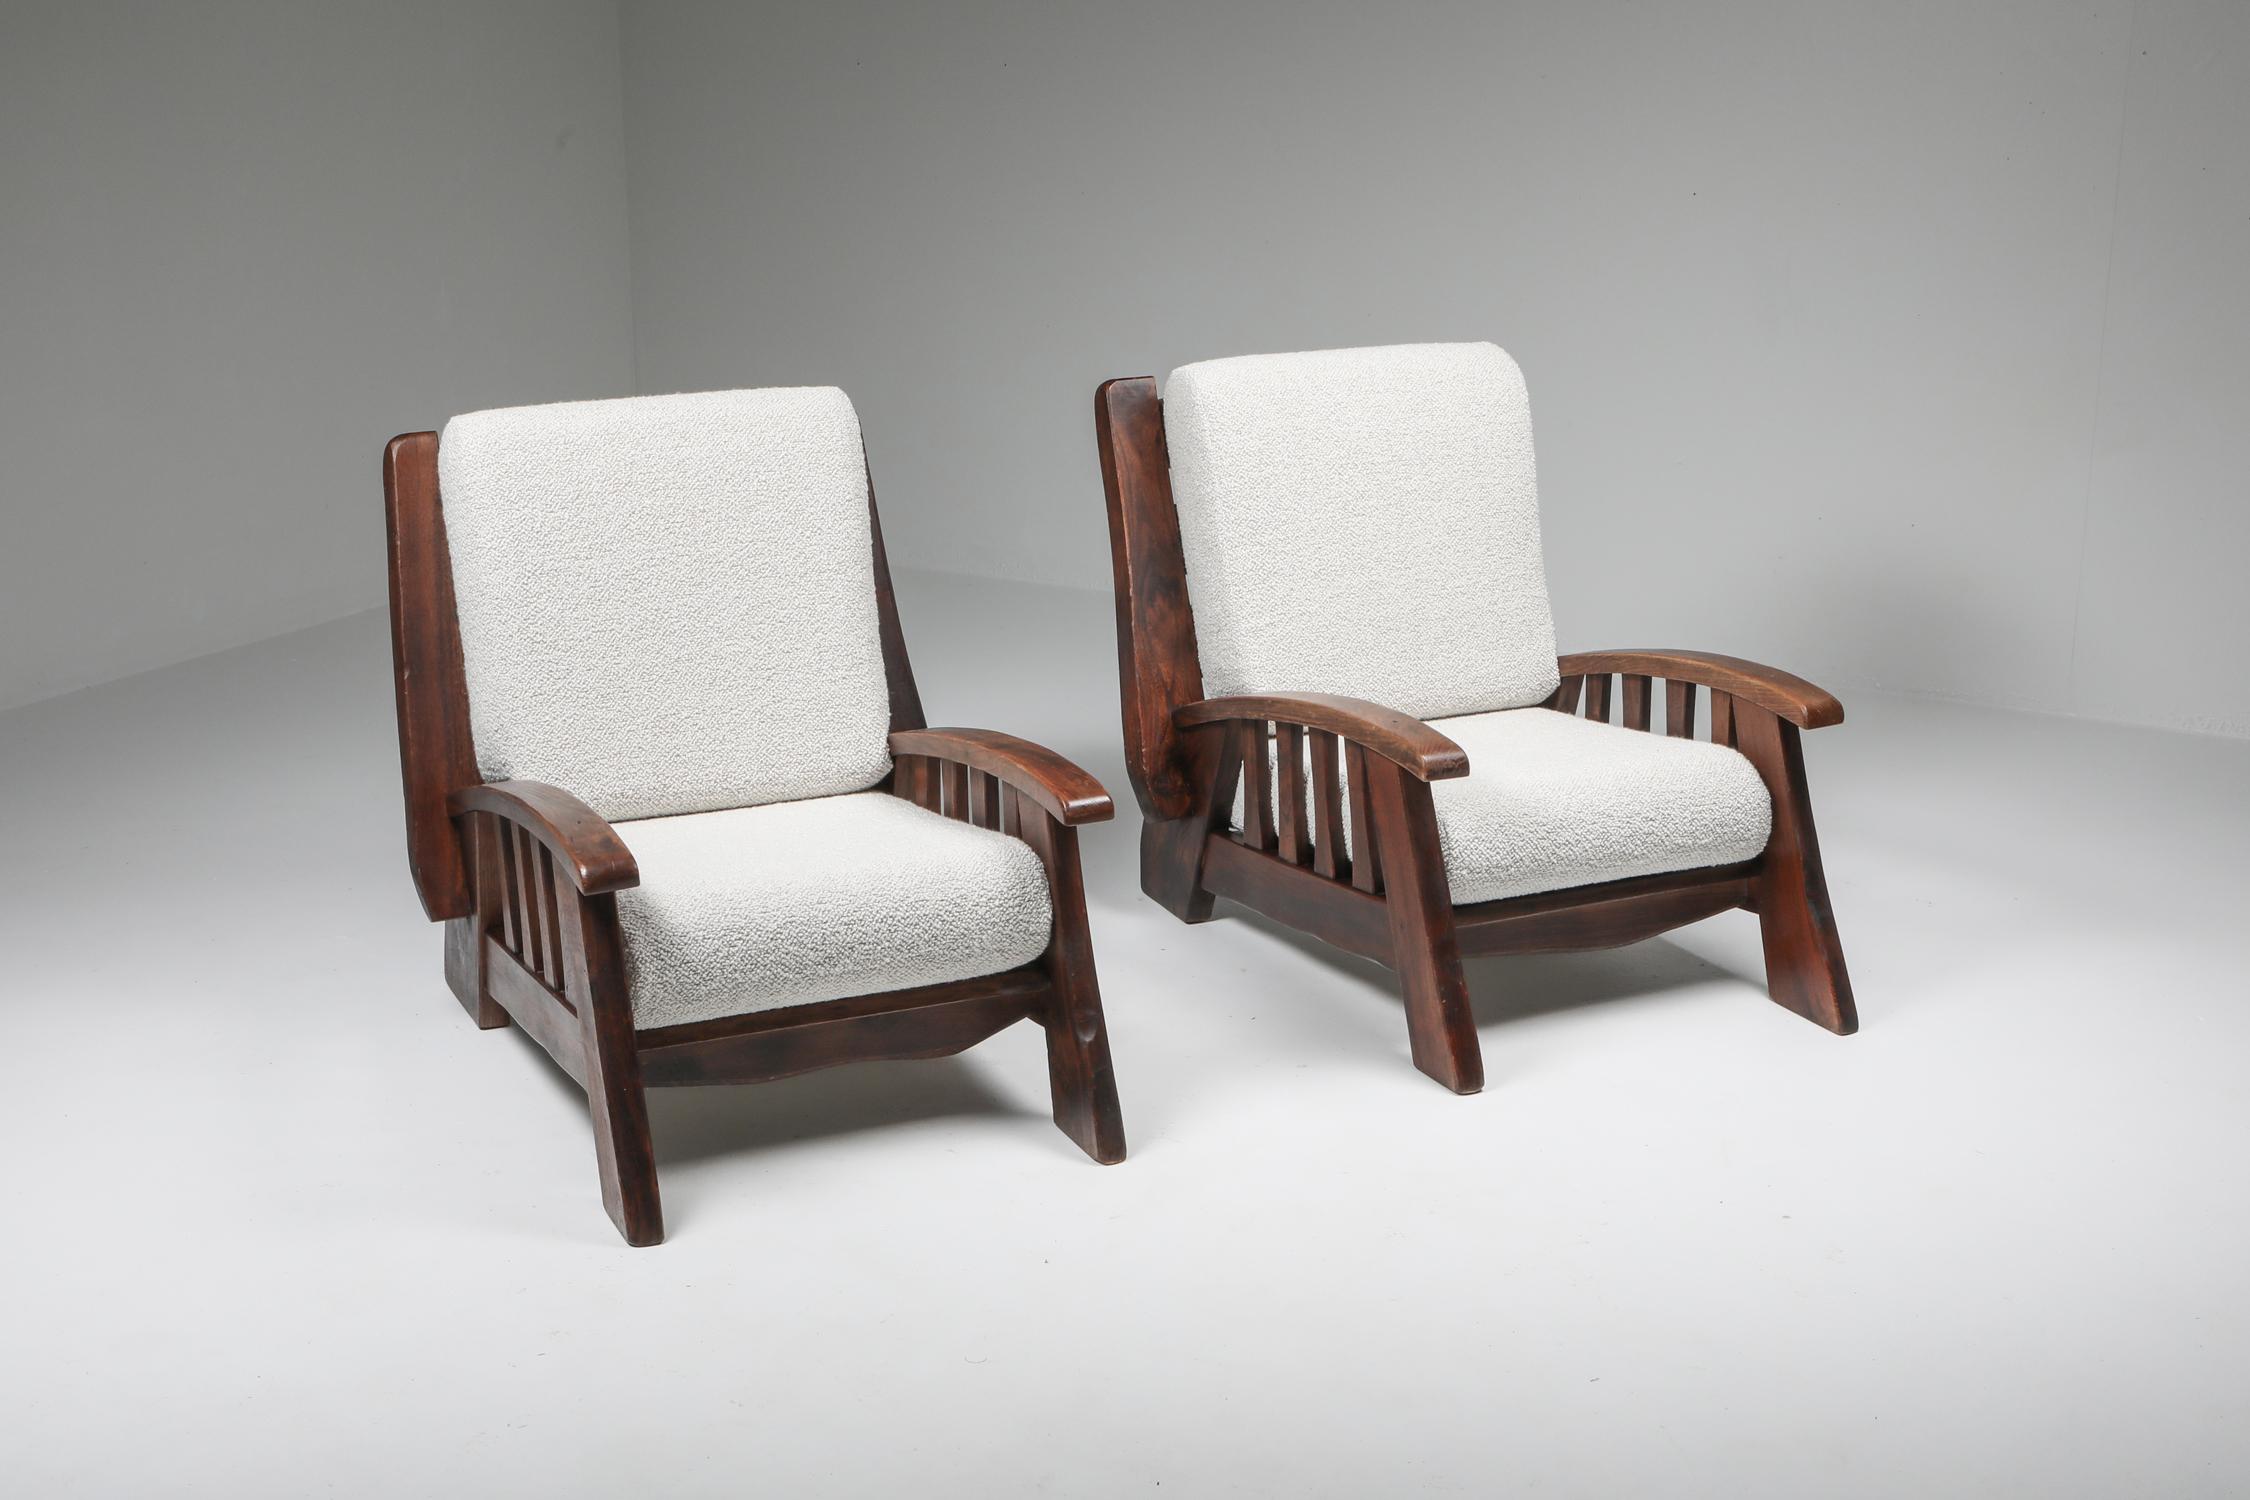 Walnut, bouclé wool, rustic modern, pair of easy chairs, Switzerland, 1960s

Wabi sabi set reupholstered in a fabulous and high end bouclé.
Would fit well in an Axel Vervoordt inspired decor.



 